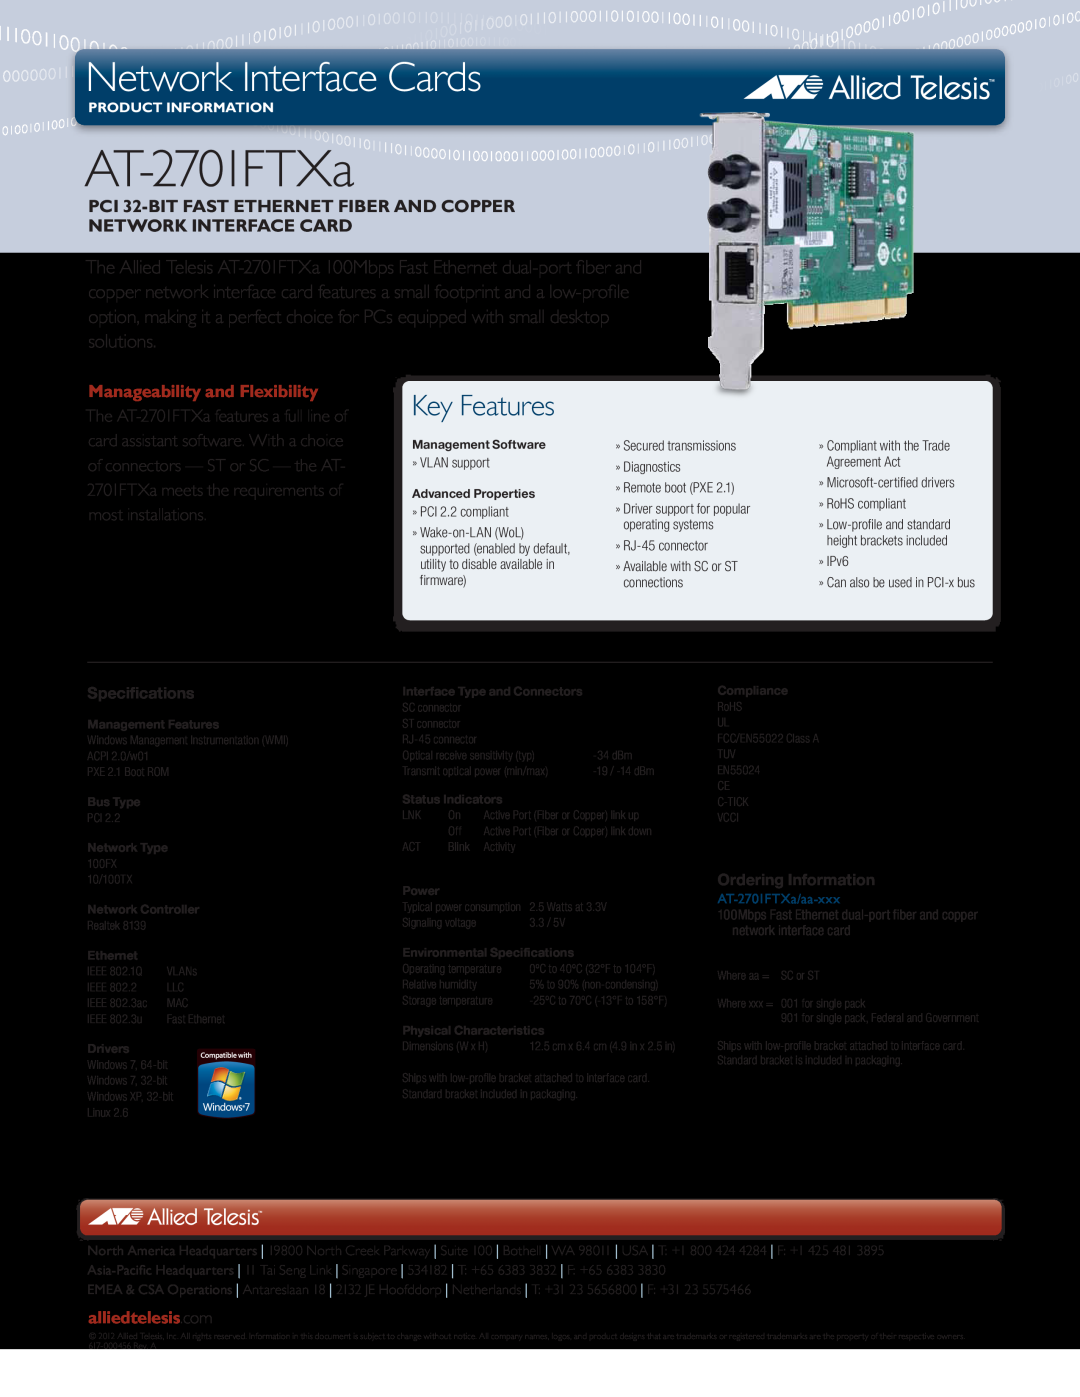 Allied Telesis AT-2701FTXA/ST-901 specifications AT-2701FTXa, Network Interface Cards, Key Features, alliedtelesis.com 